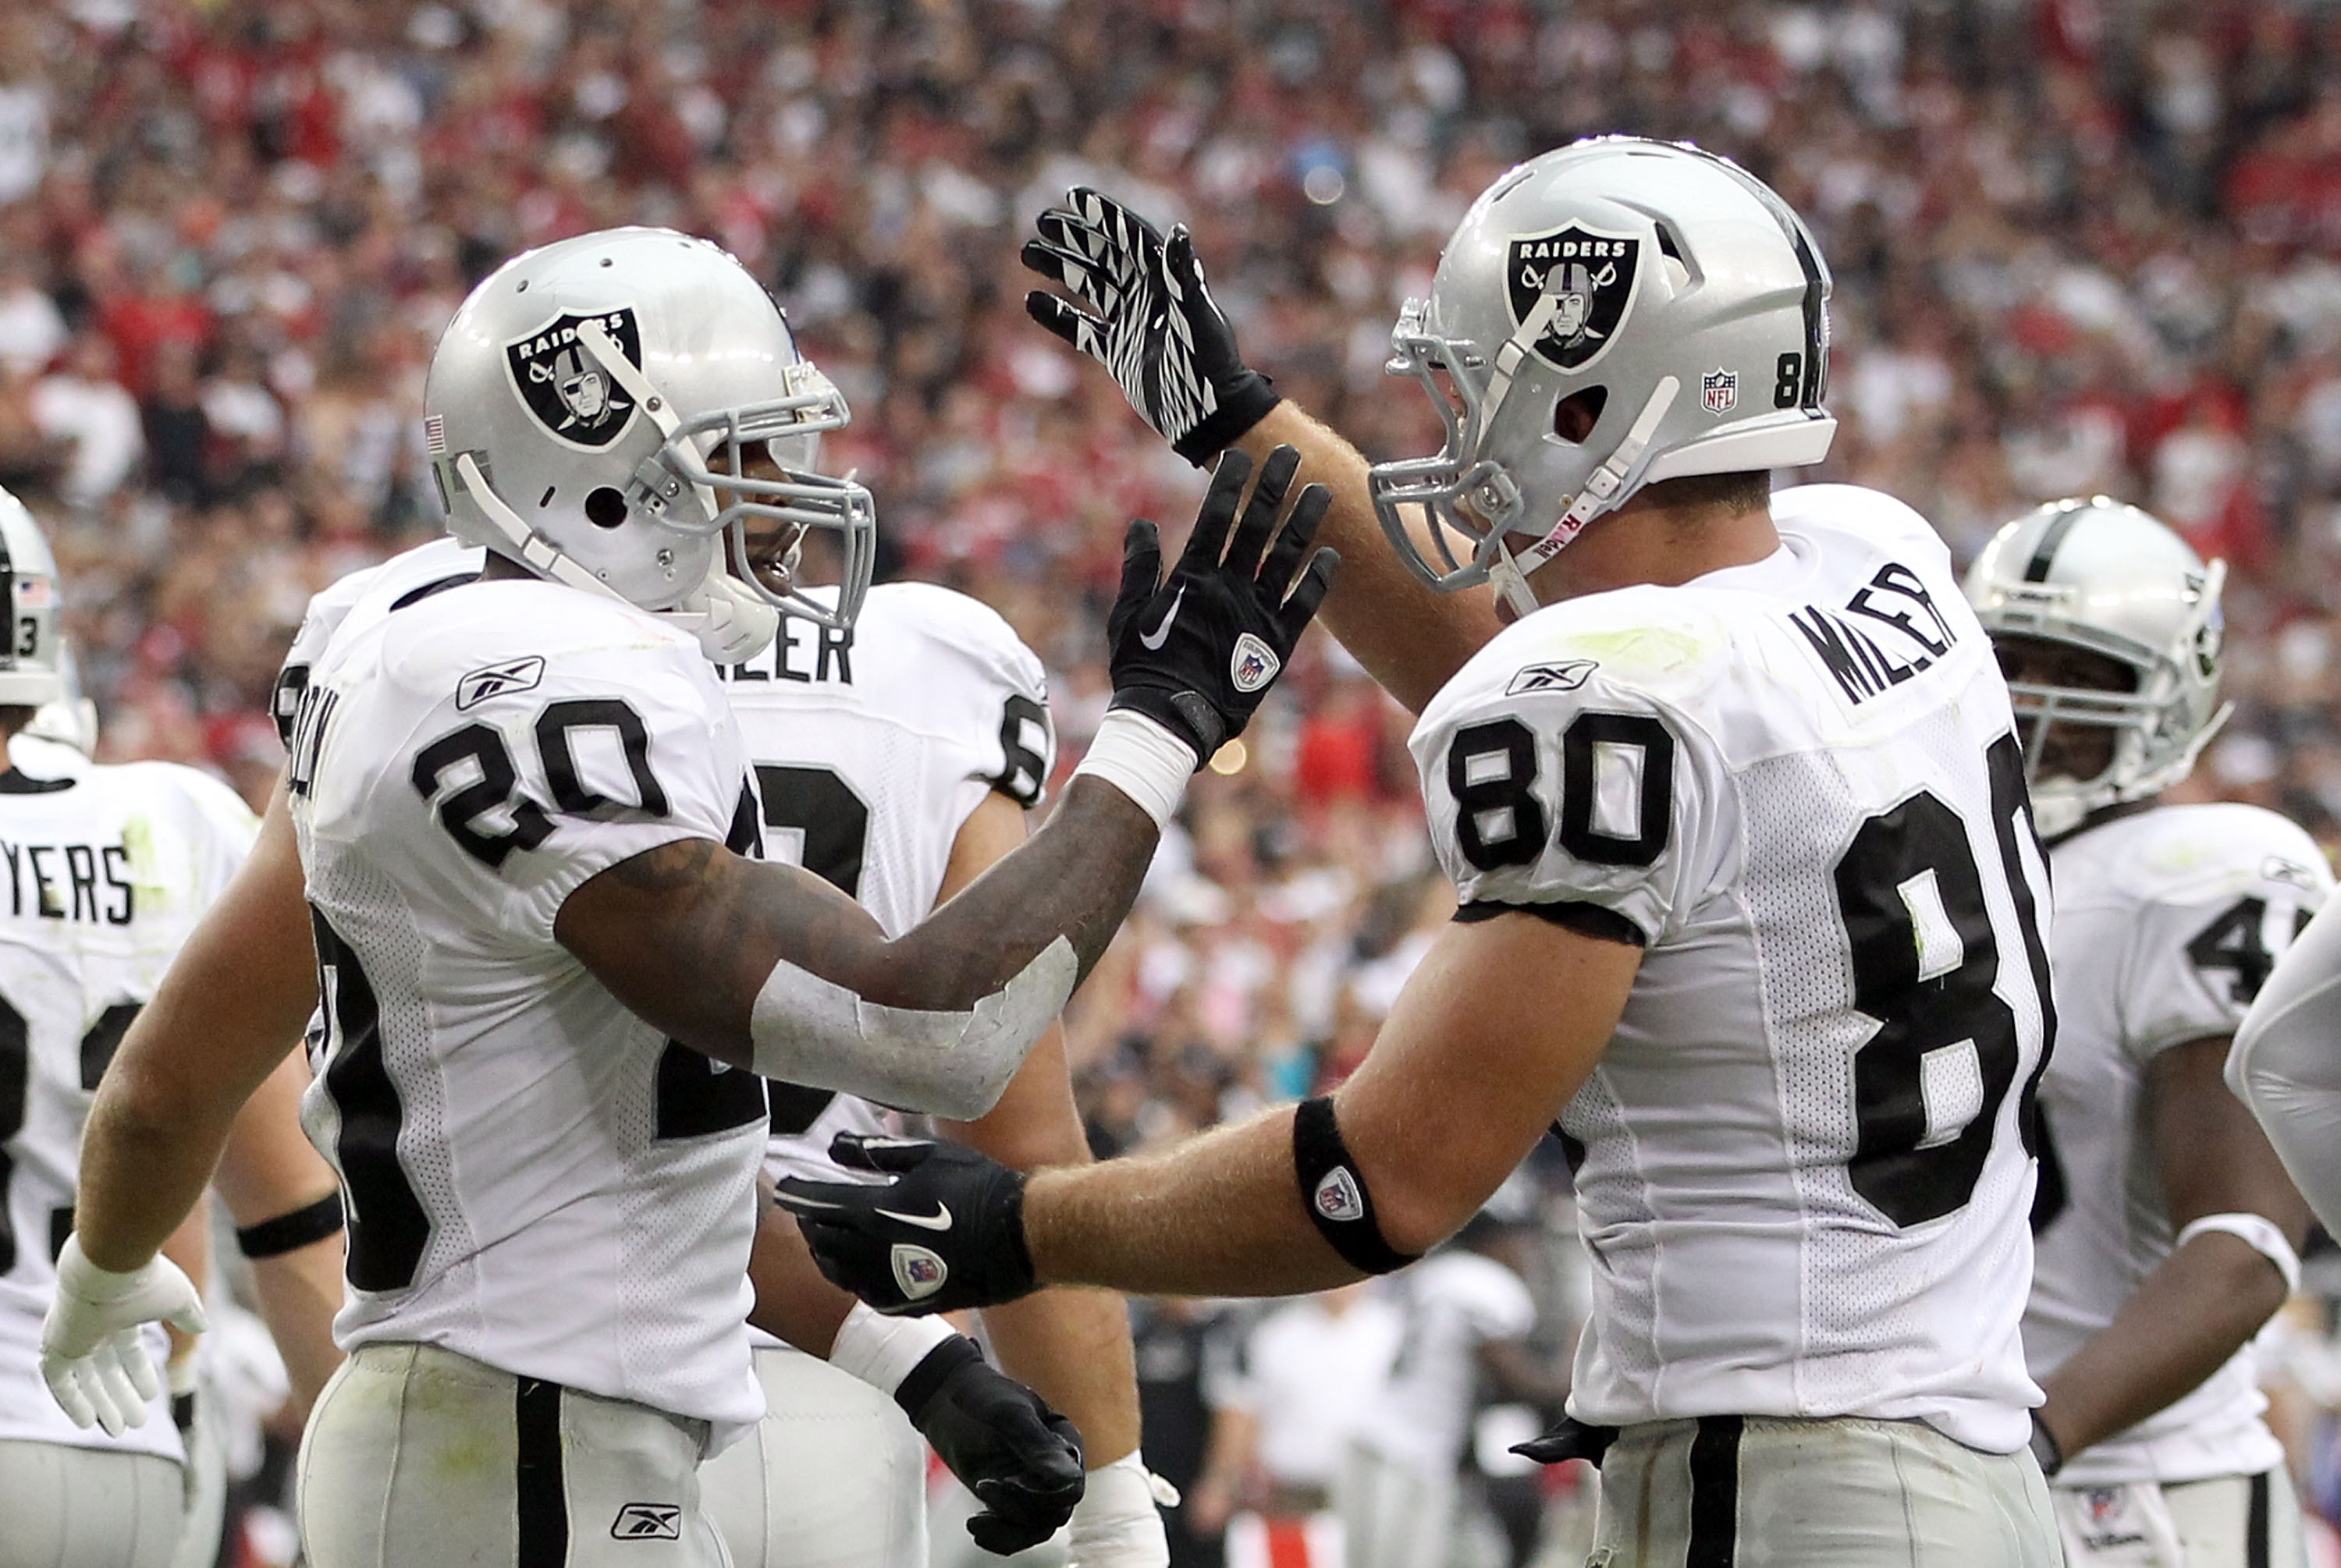 GLENDALE, AZ - SEPTEMBER 26:  Runningback Darren McFadden #20 of the Oakland Raiders celebrates with teammate Zach Miller #80 after McFadden scored a 2 yard rushing touchdown against the Arizona Cardinals during the second quarter of the NFL game at the U